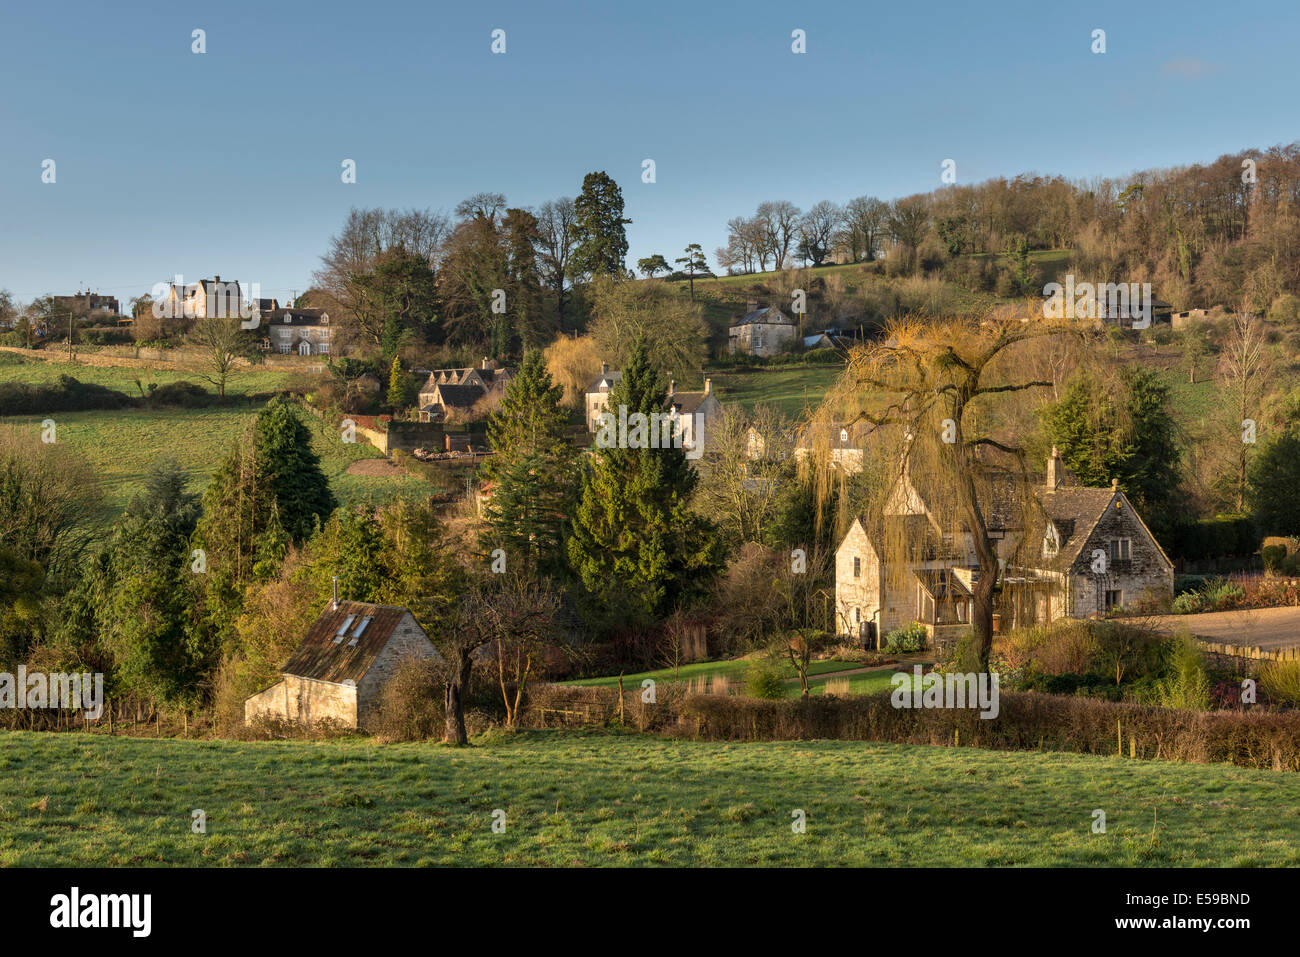 Picturesque Cotswold Village of Pitchcombe, Gloucestershire, UK Stock Photo